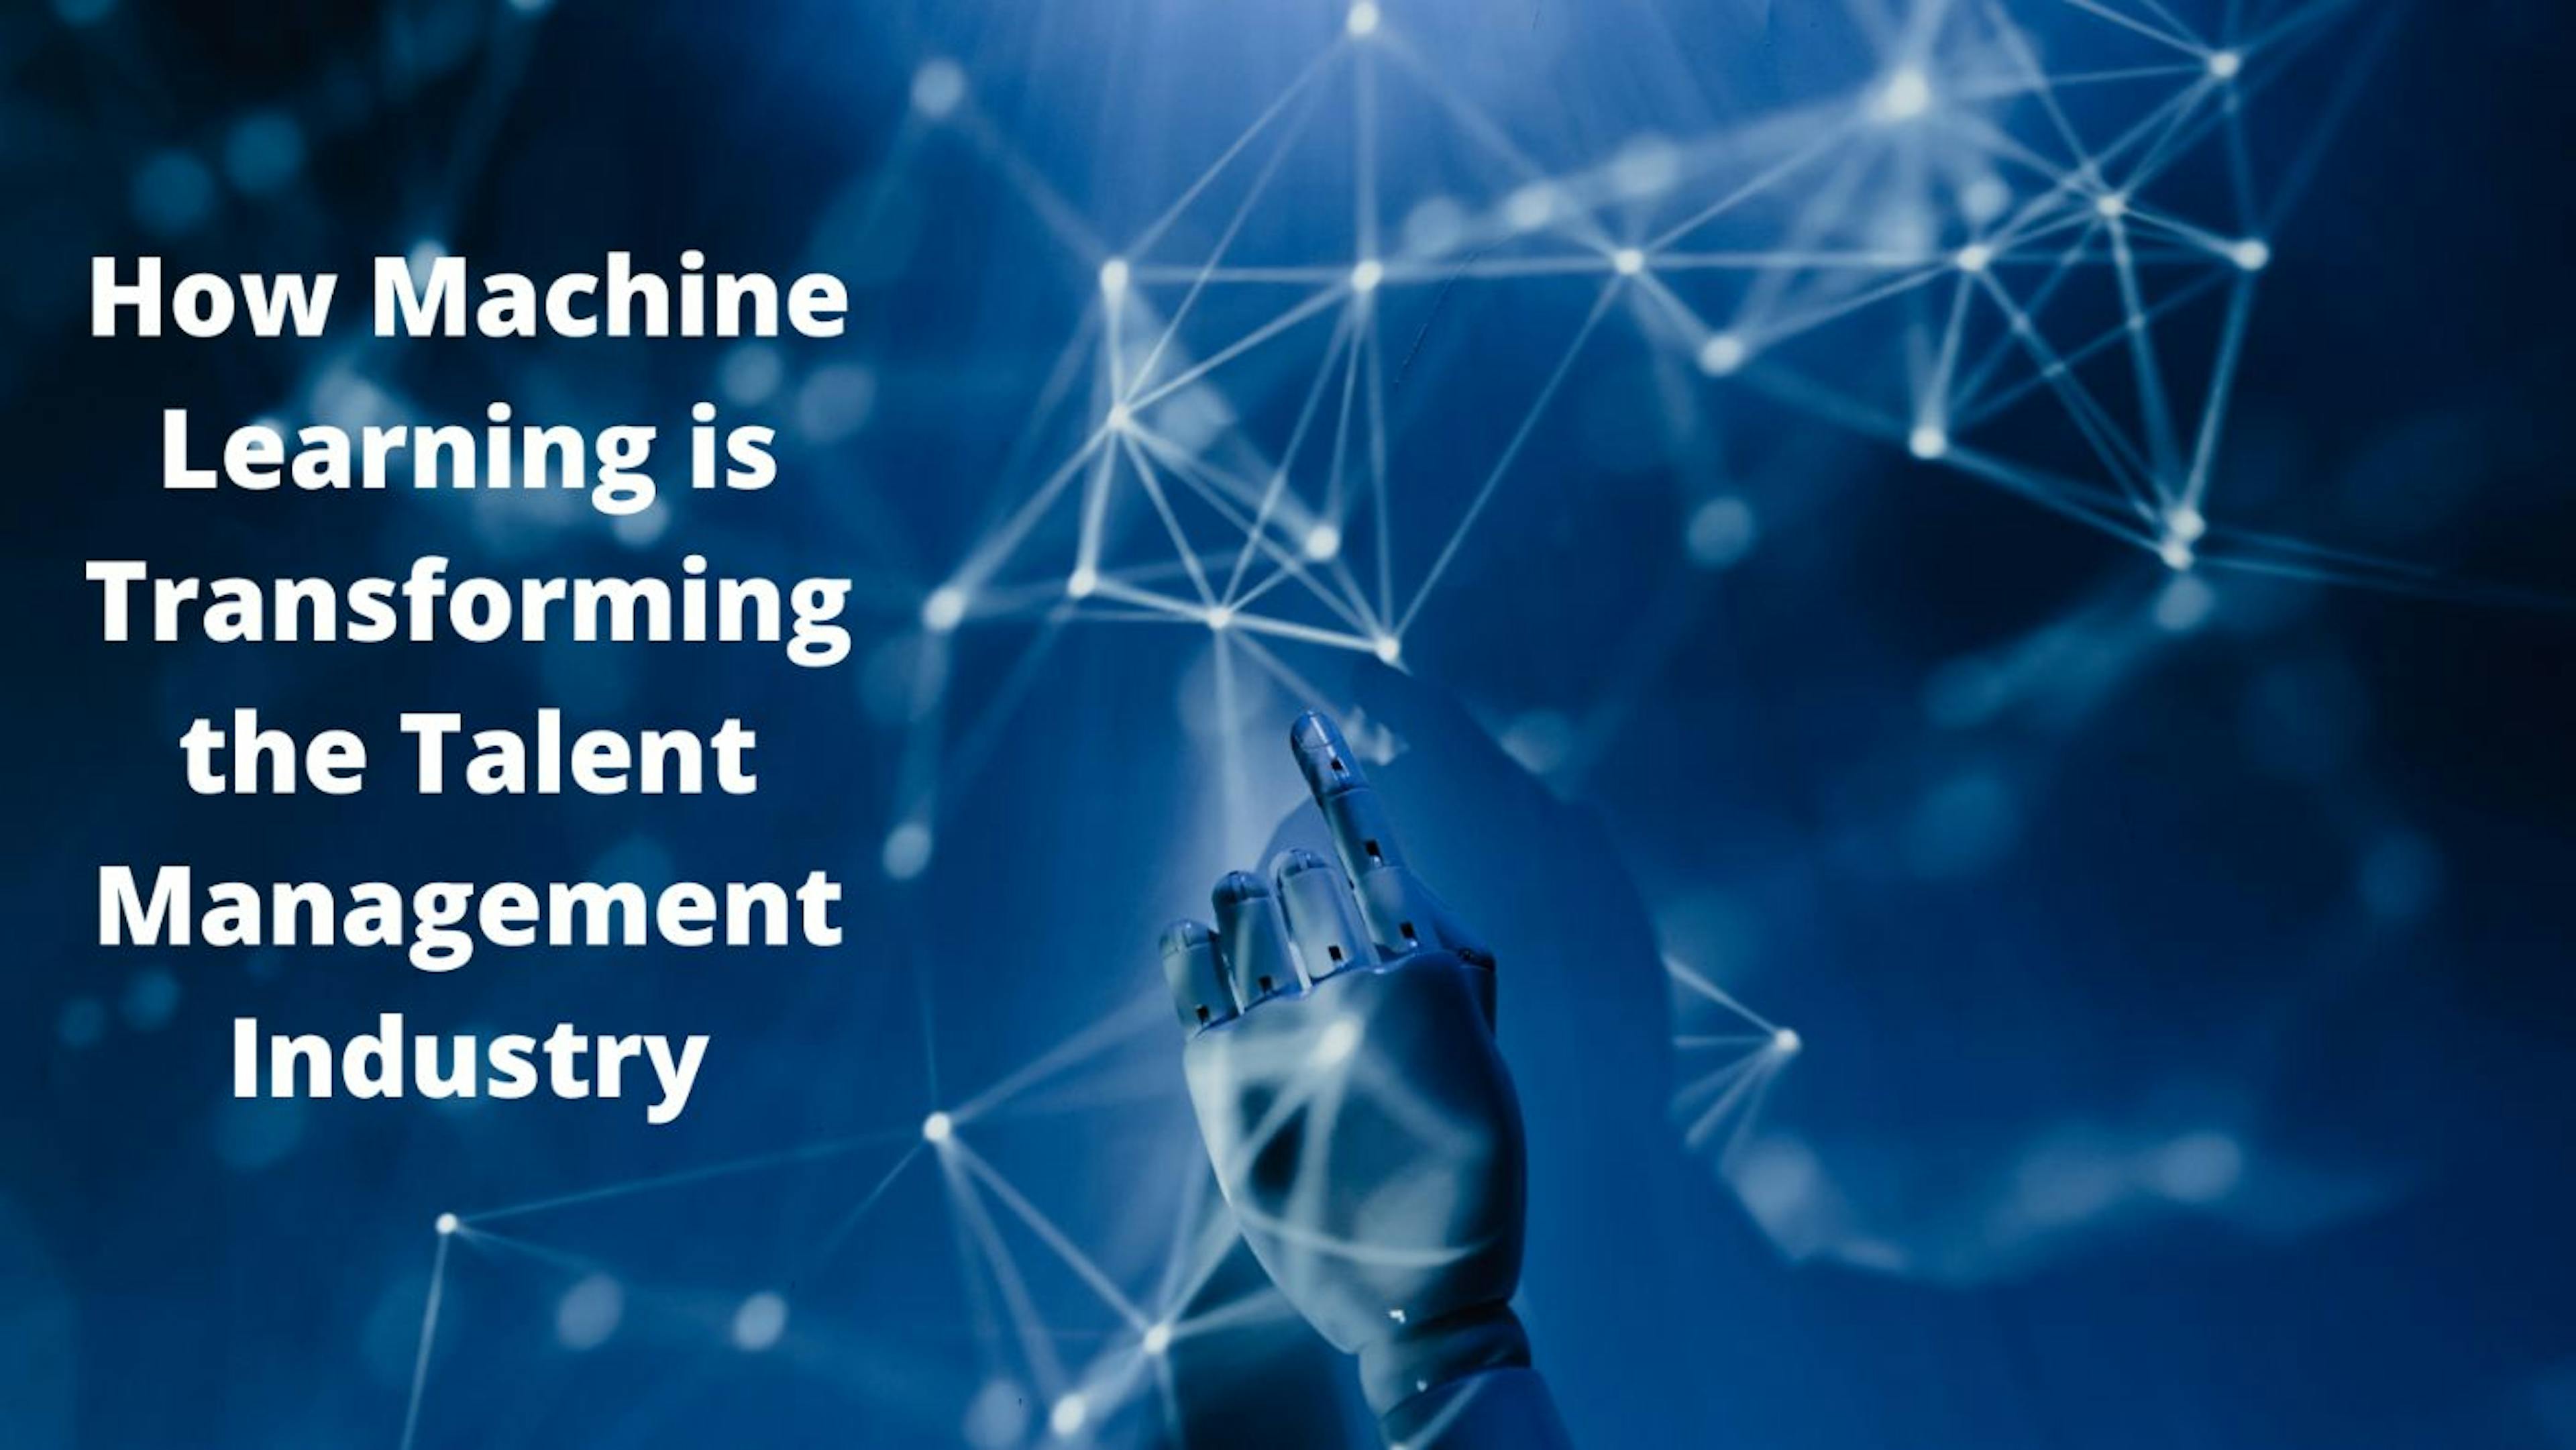 featured image - How Machine Learning is Transforming the Talent Management Industry